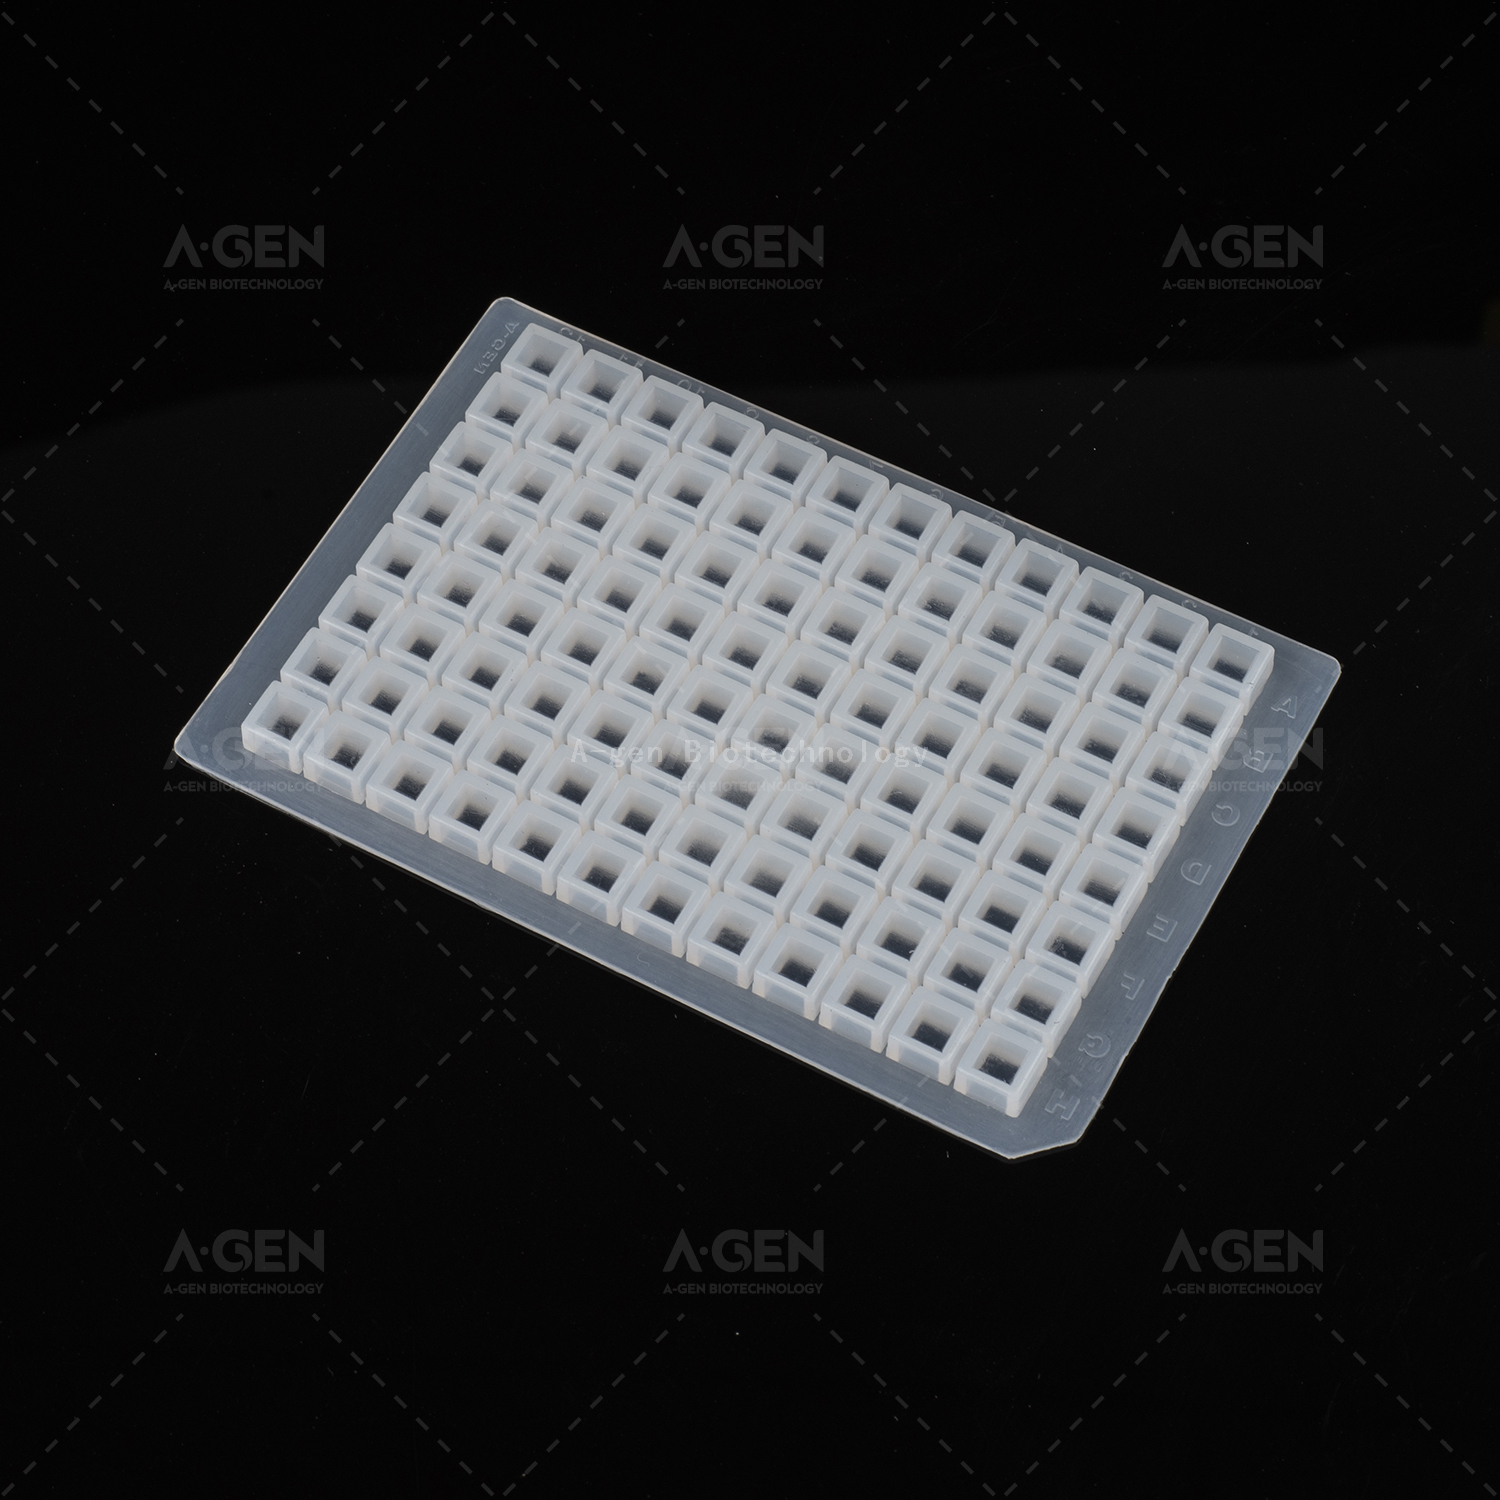  Silicone Sealing Mat for 96 Square Well plate